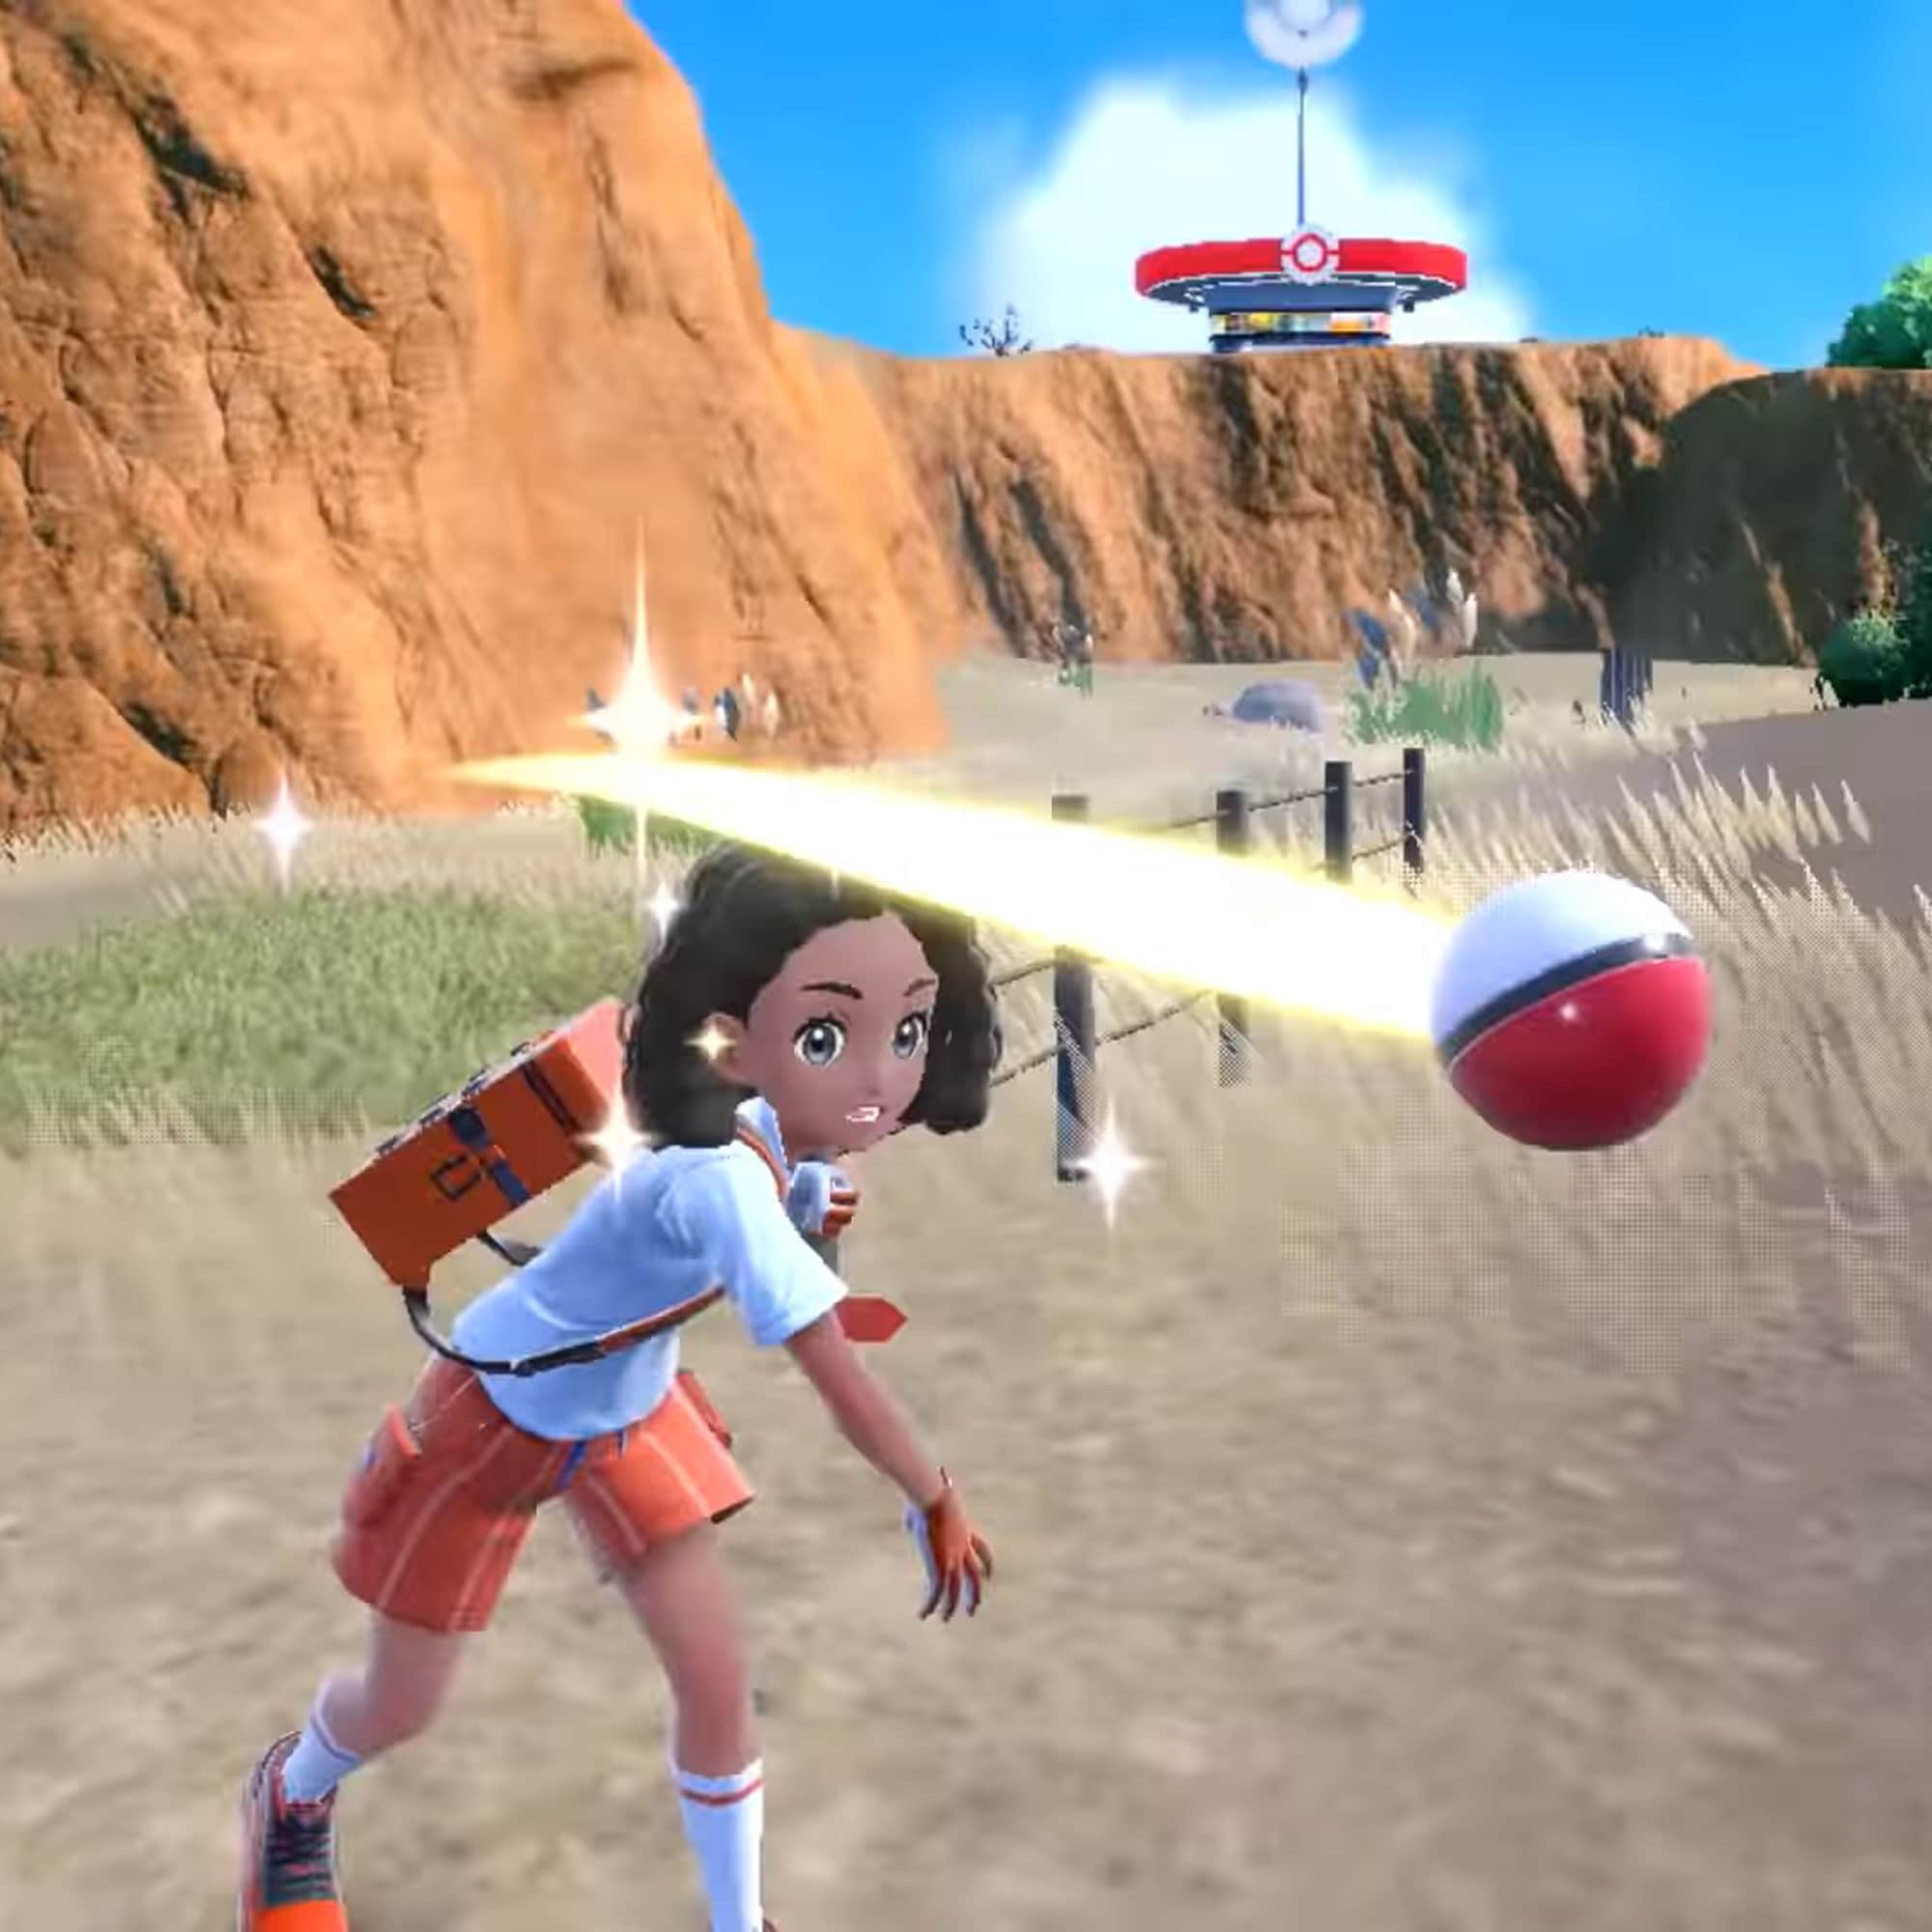 The player character throwing a Poké Ball in Pokémon Scarlet and Violet.